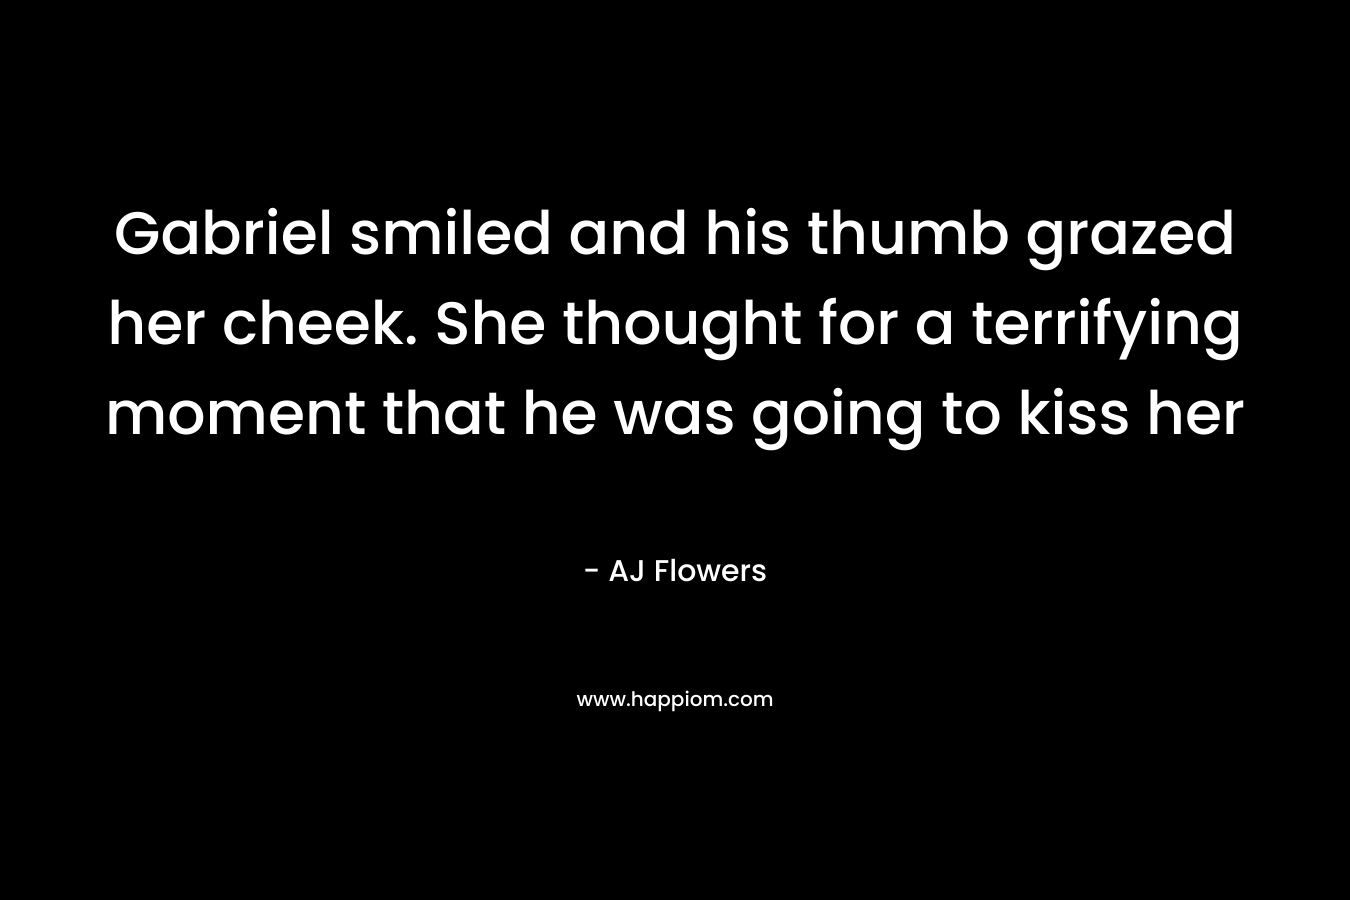 Gabriel smiled and his thumb grazed her cheek. She thought for a terrifying moment that he was going to kiss her – AJ Flowers